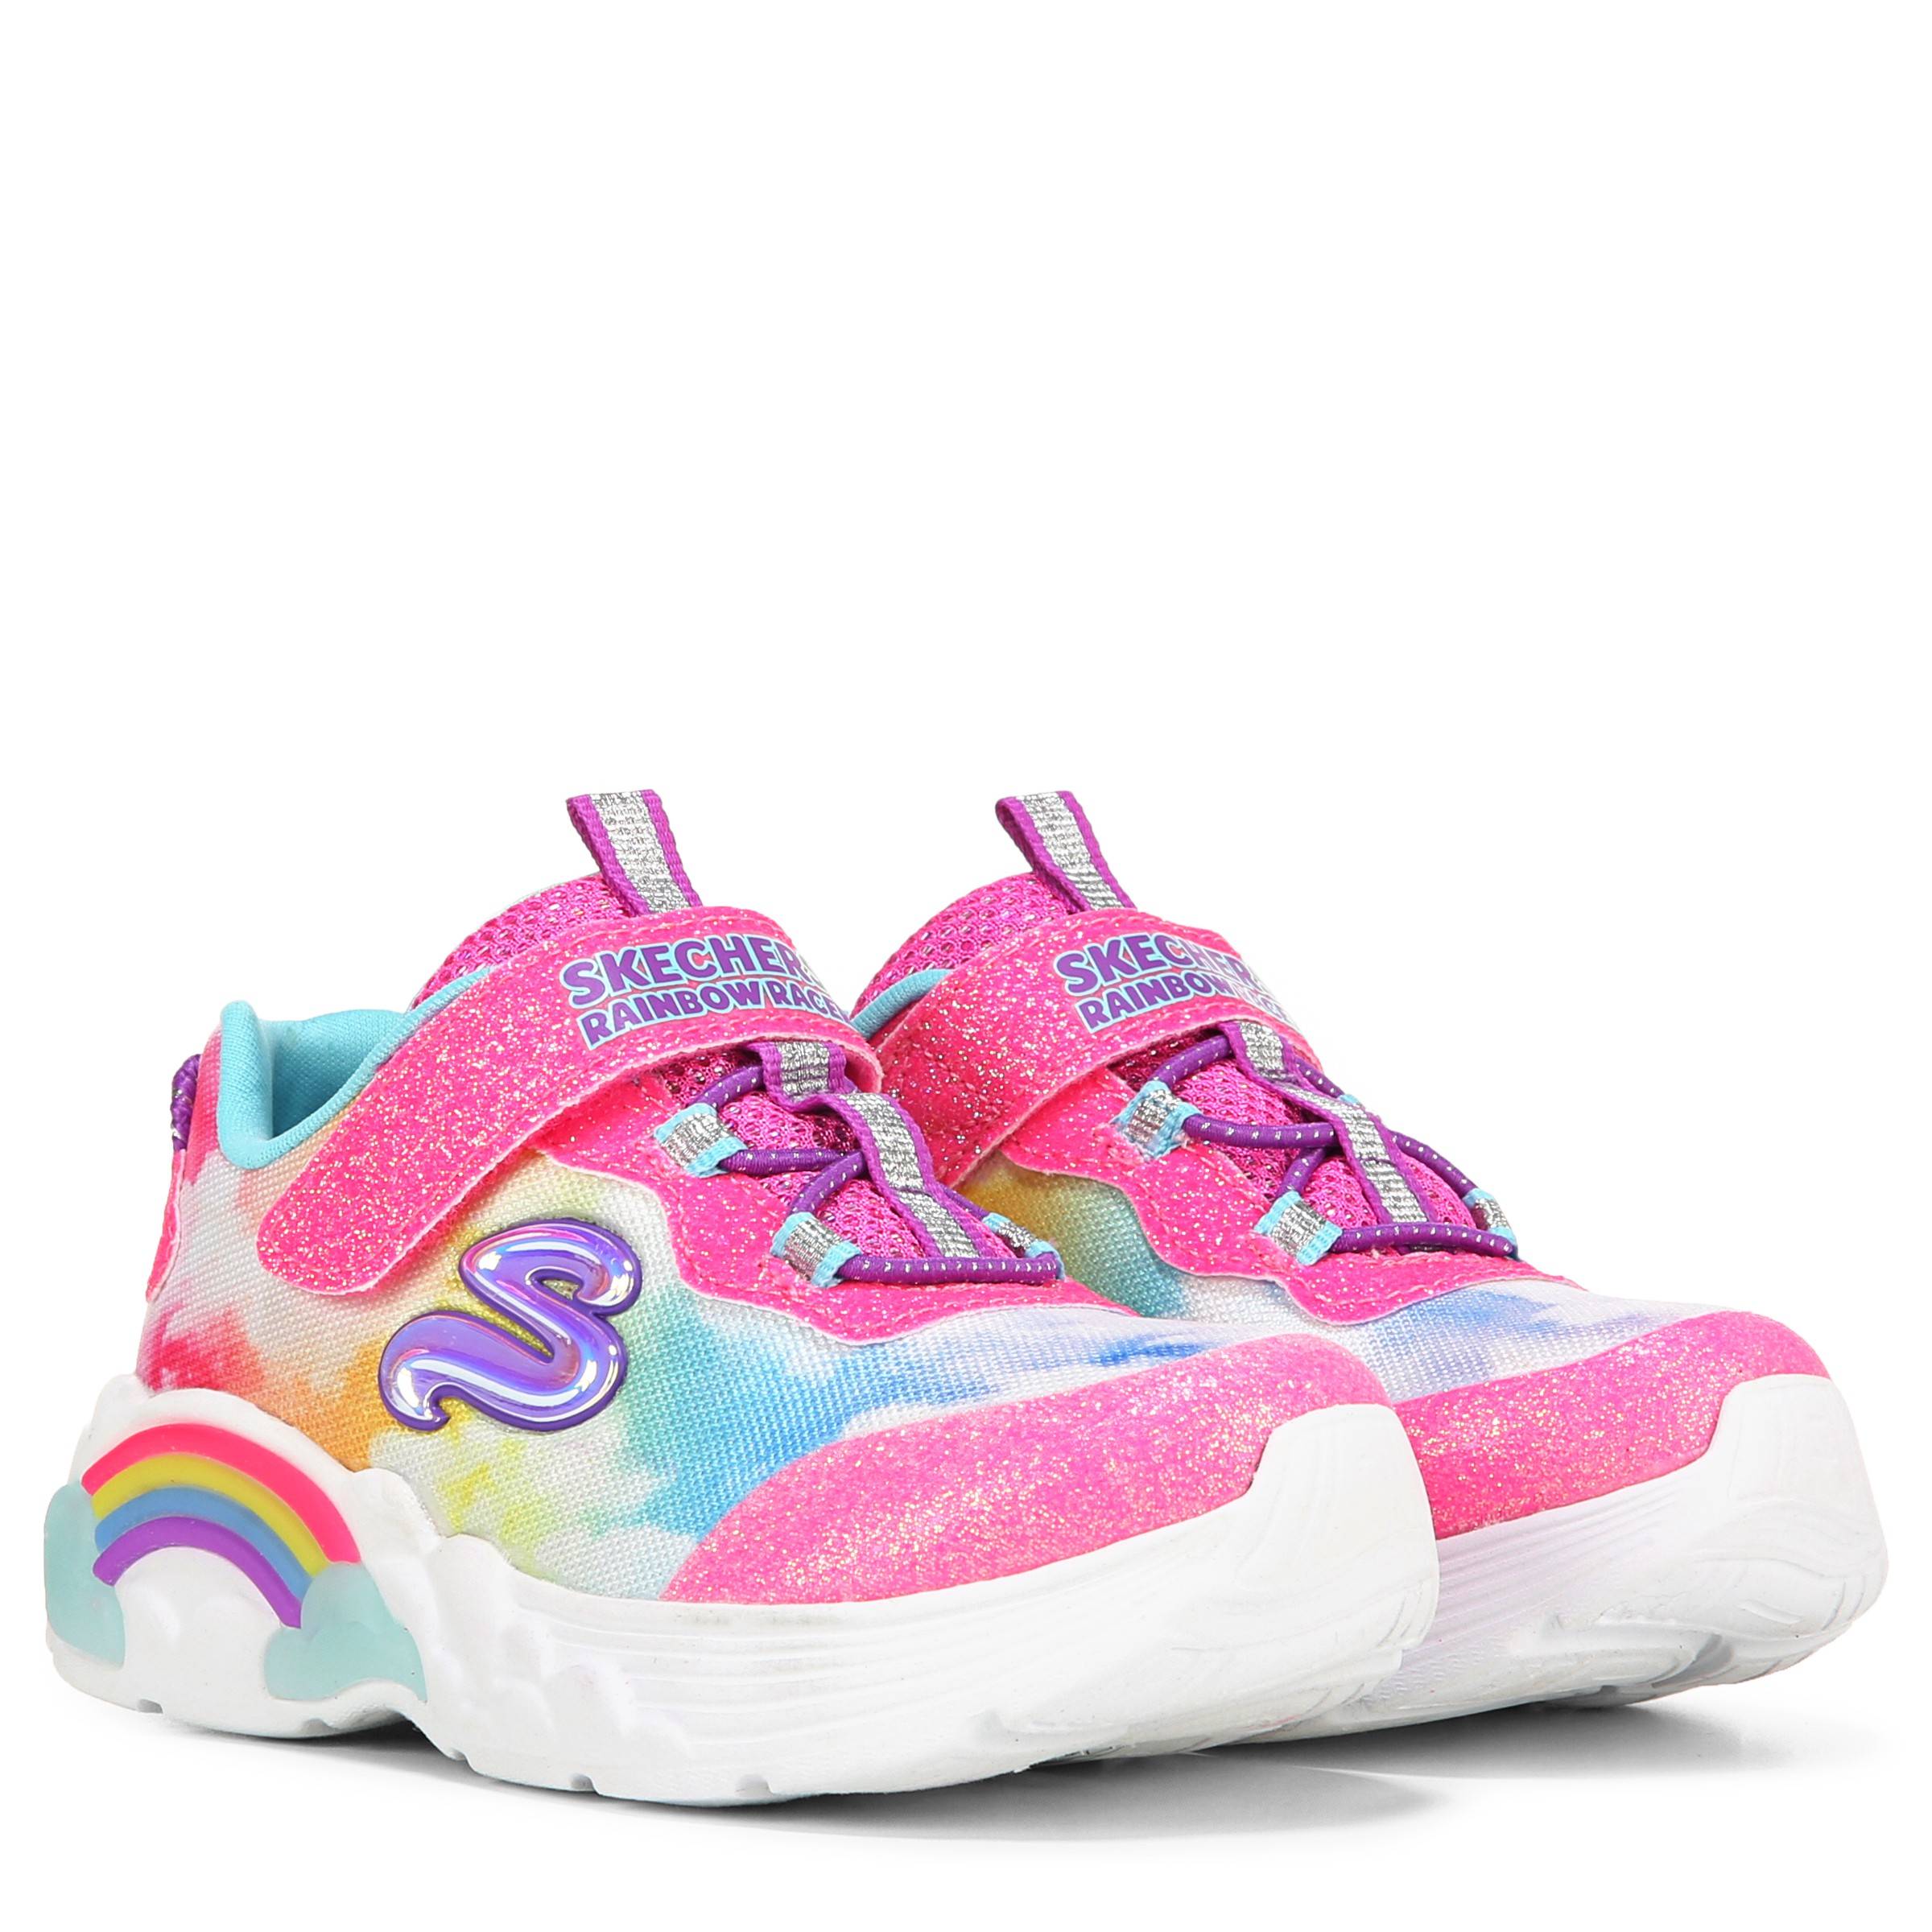 party shoes girl shoes Little Girl Sneakers White/Pink baby girl shoes toddler shoes kid sneakers girl shoes Schoenen Meisjesschoenen Sneakers & Sportschoenen girl running shoes 